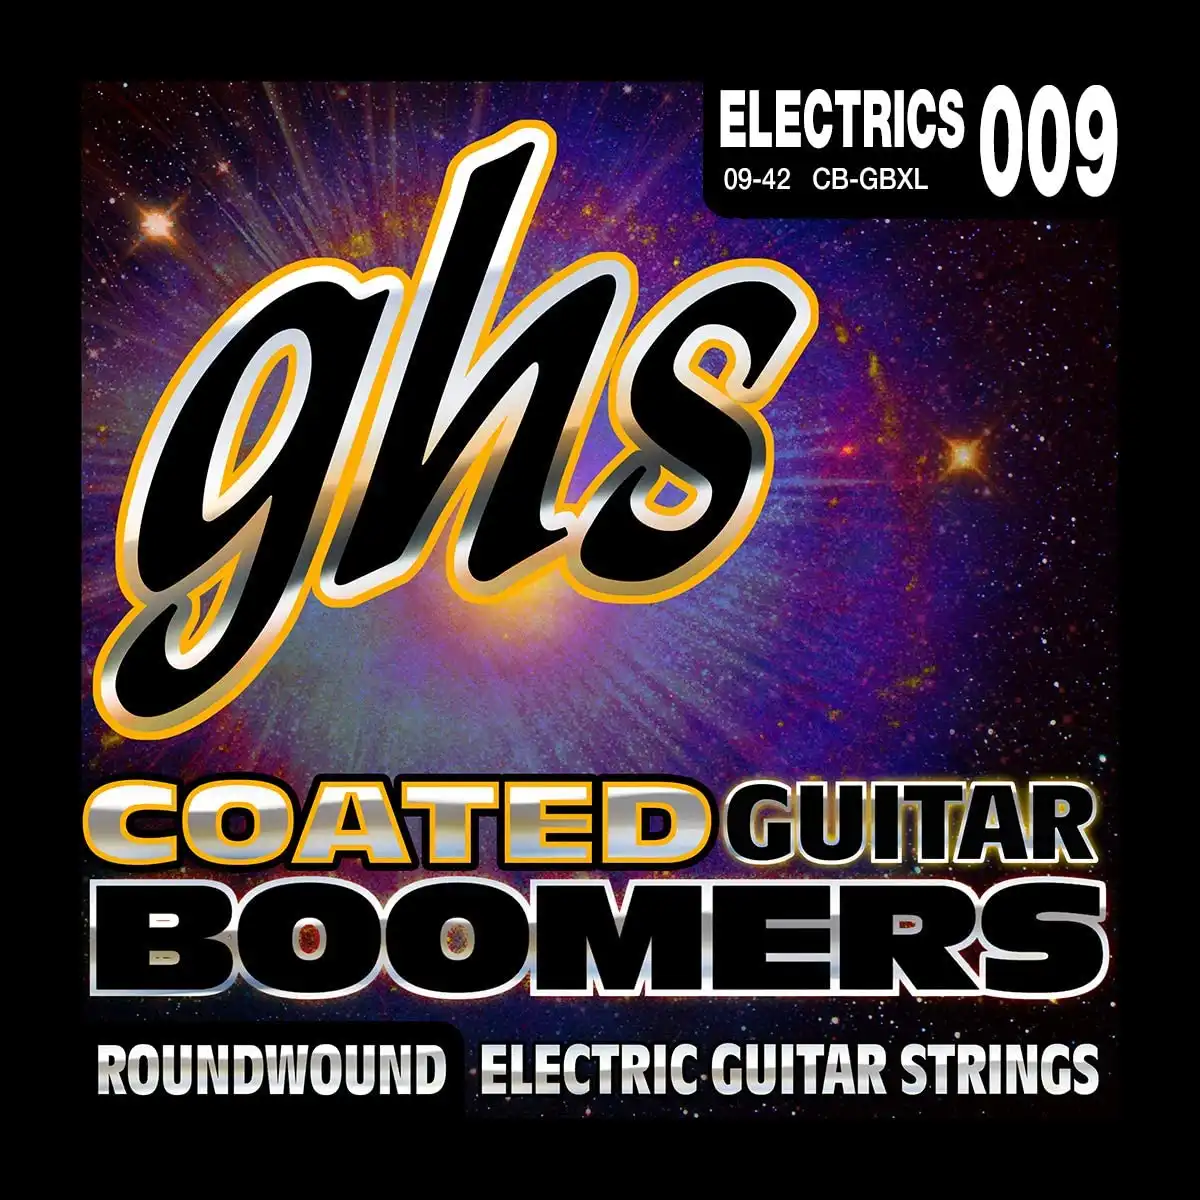 GHS CB-GBXL Extra Light Coated Boomers Roundwound Electric Guitar Strings (6-String Set, 09 - 42)